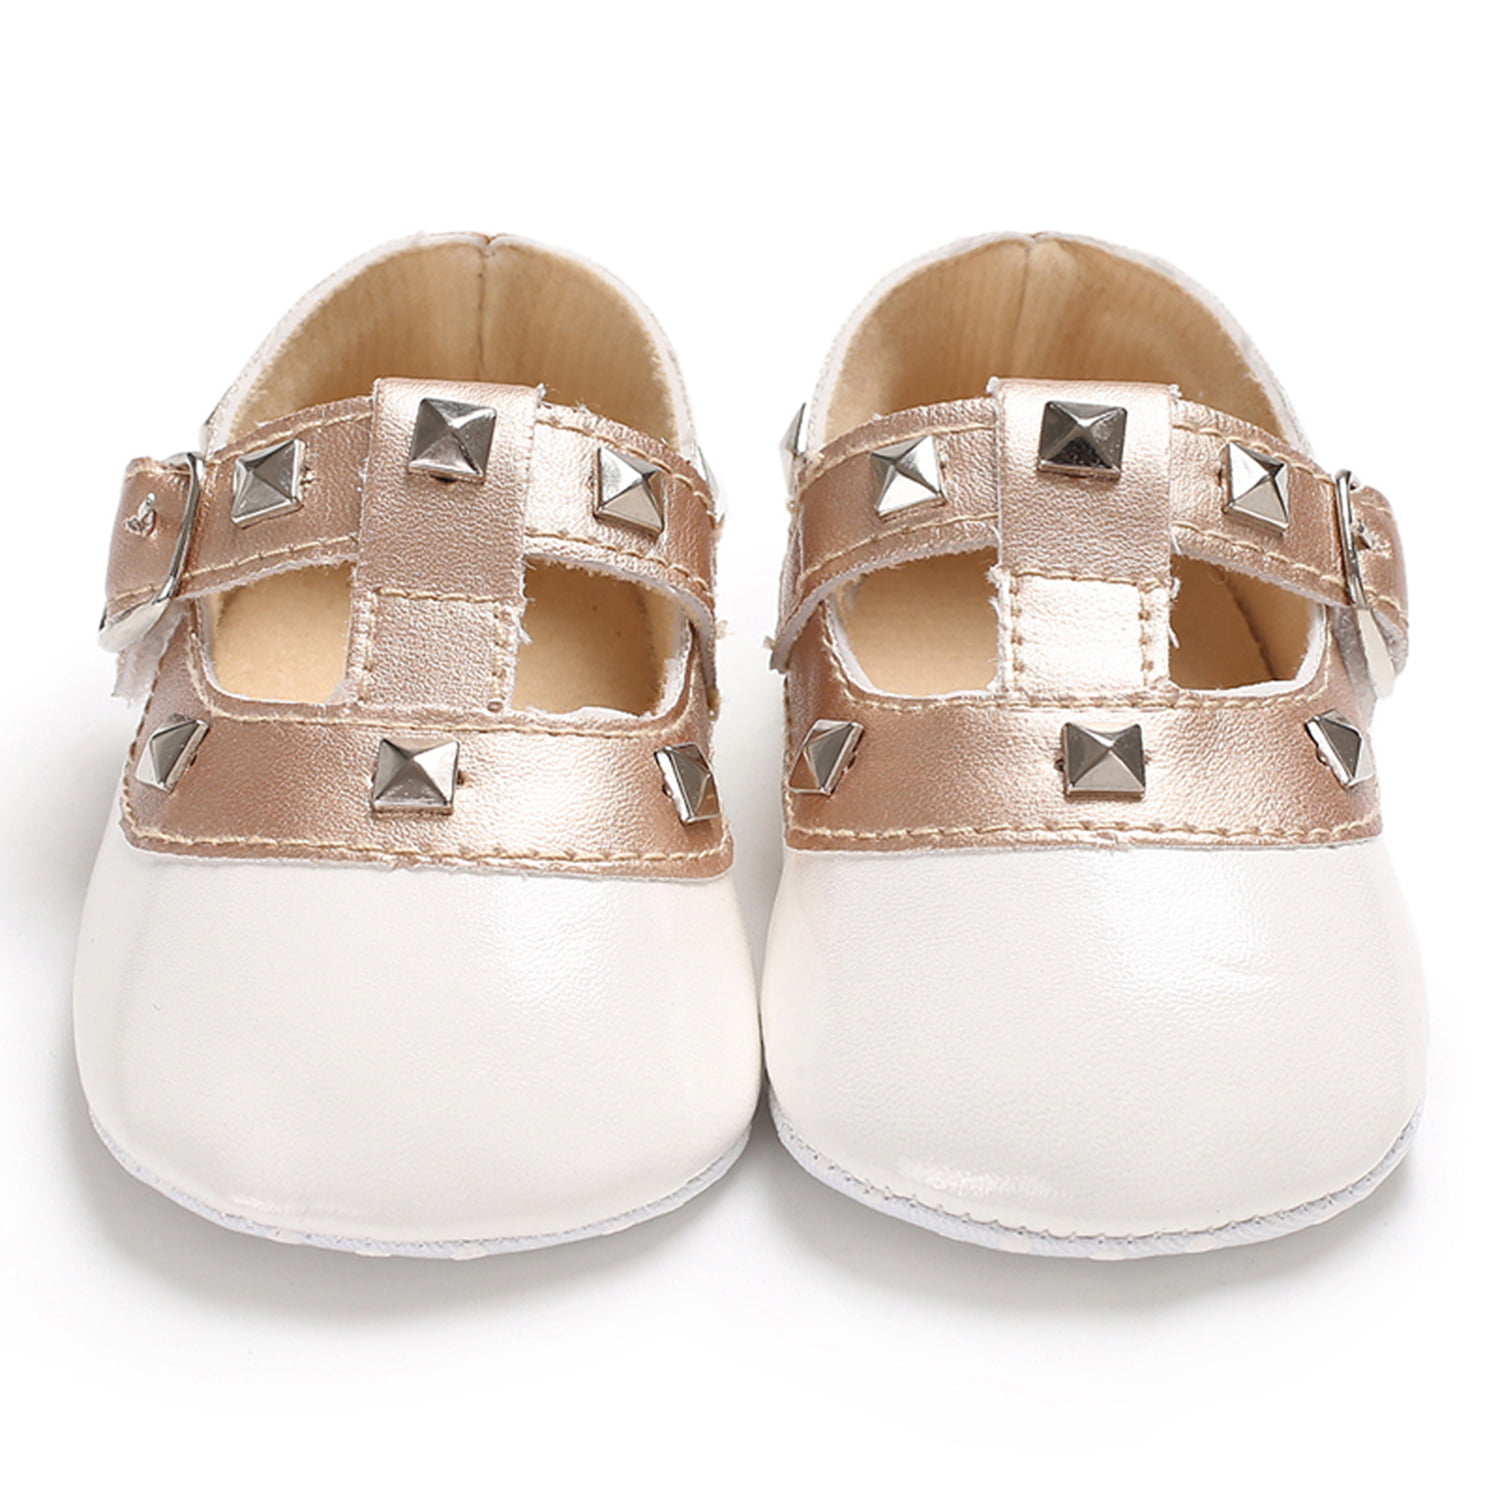 Kids Baby Toddler Girl Soft Sole Princess Shoes Cat Leather Moccasins Sneakers T 